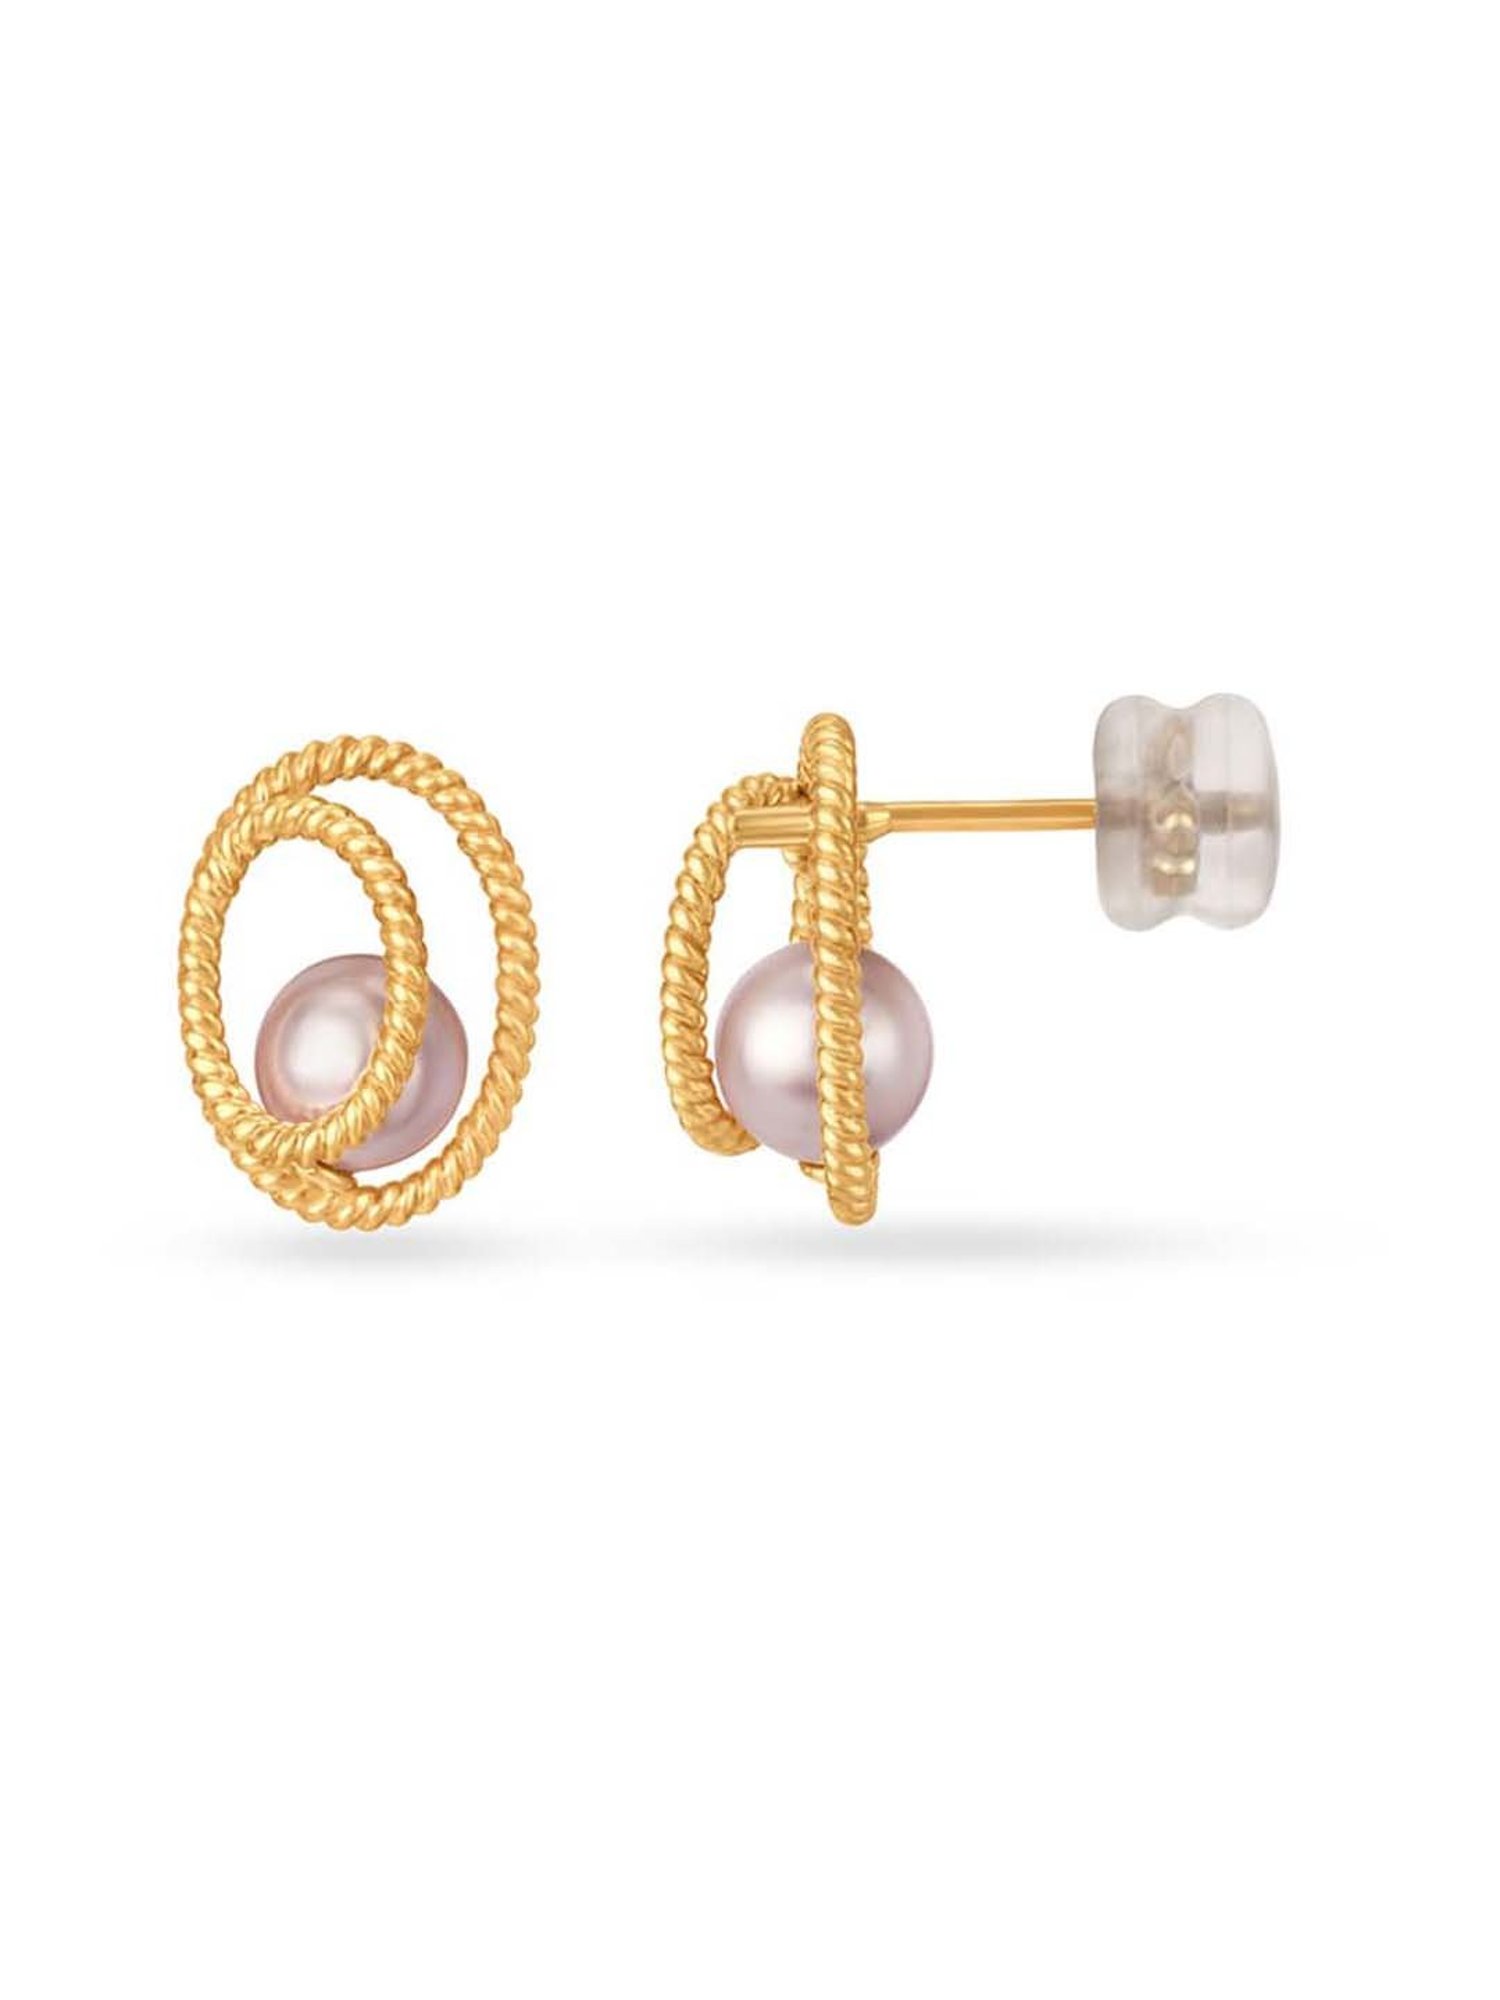 Charming 18 Karat White Gold And Pearl Earrings